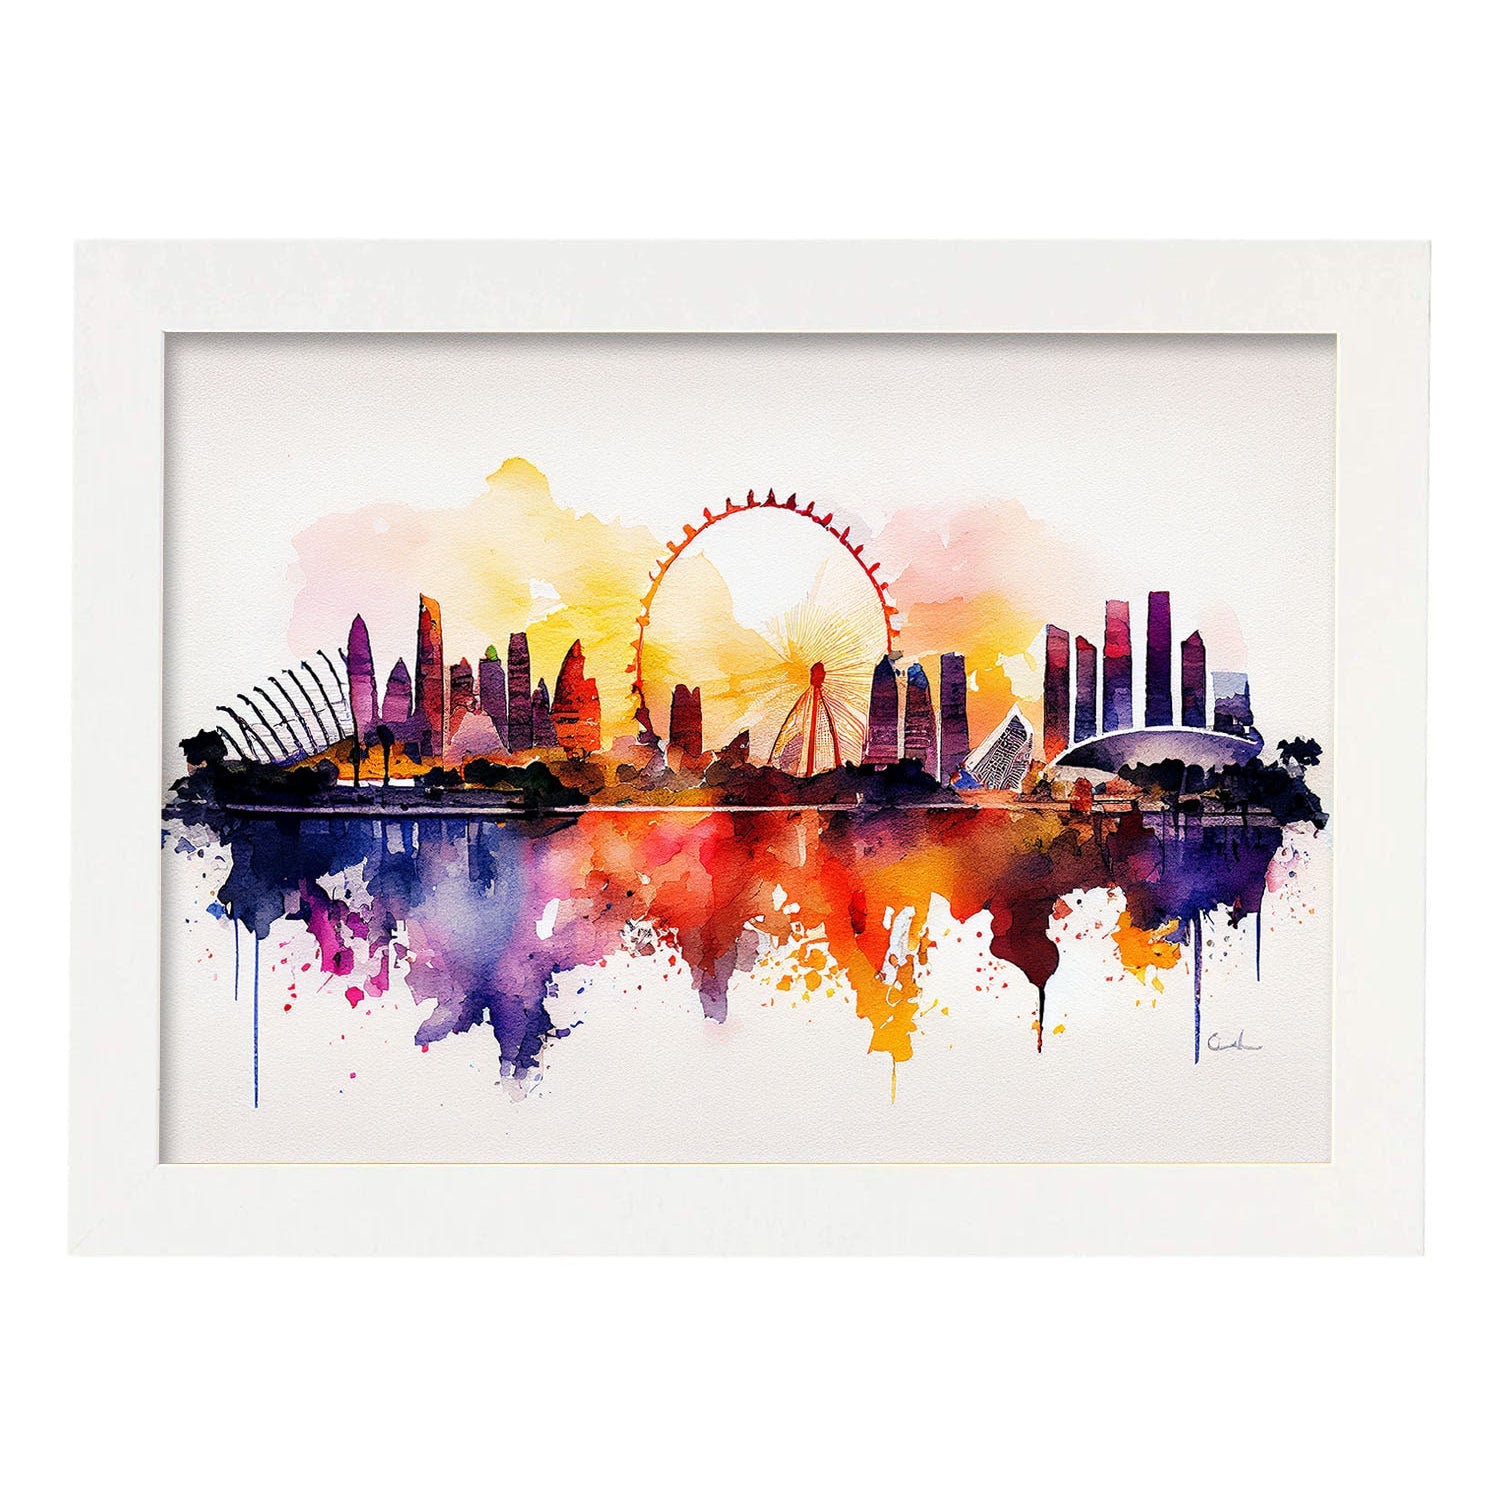 Nacnic watercolor of a skyline of the city of Singapore_3. Aesthetic Wall Art Prints for Bedroom or Living Room Design.-Artwork-Nacnic-A4-Marco Blanco-Nacnic Estudio SL